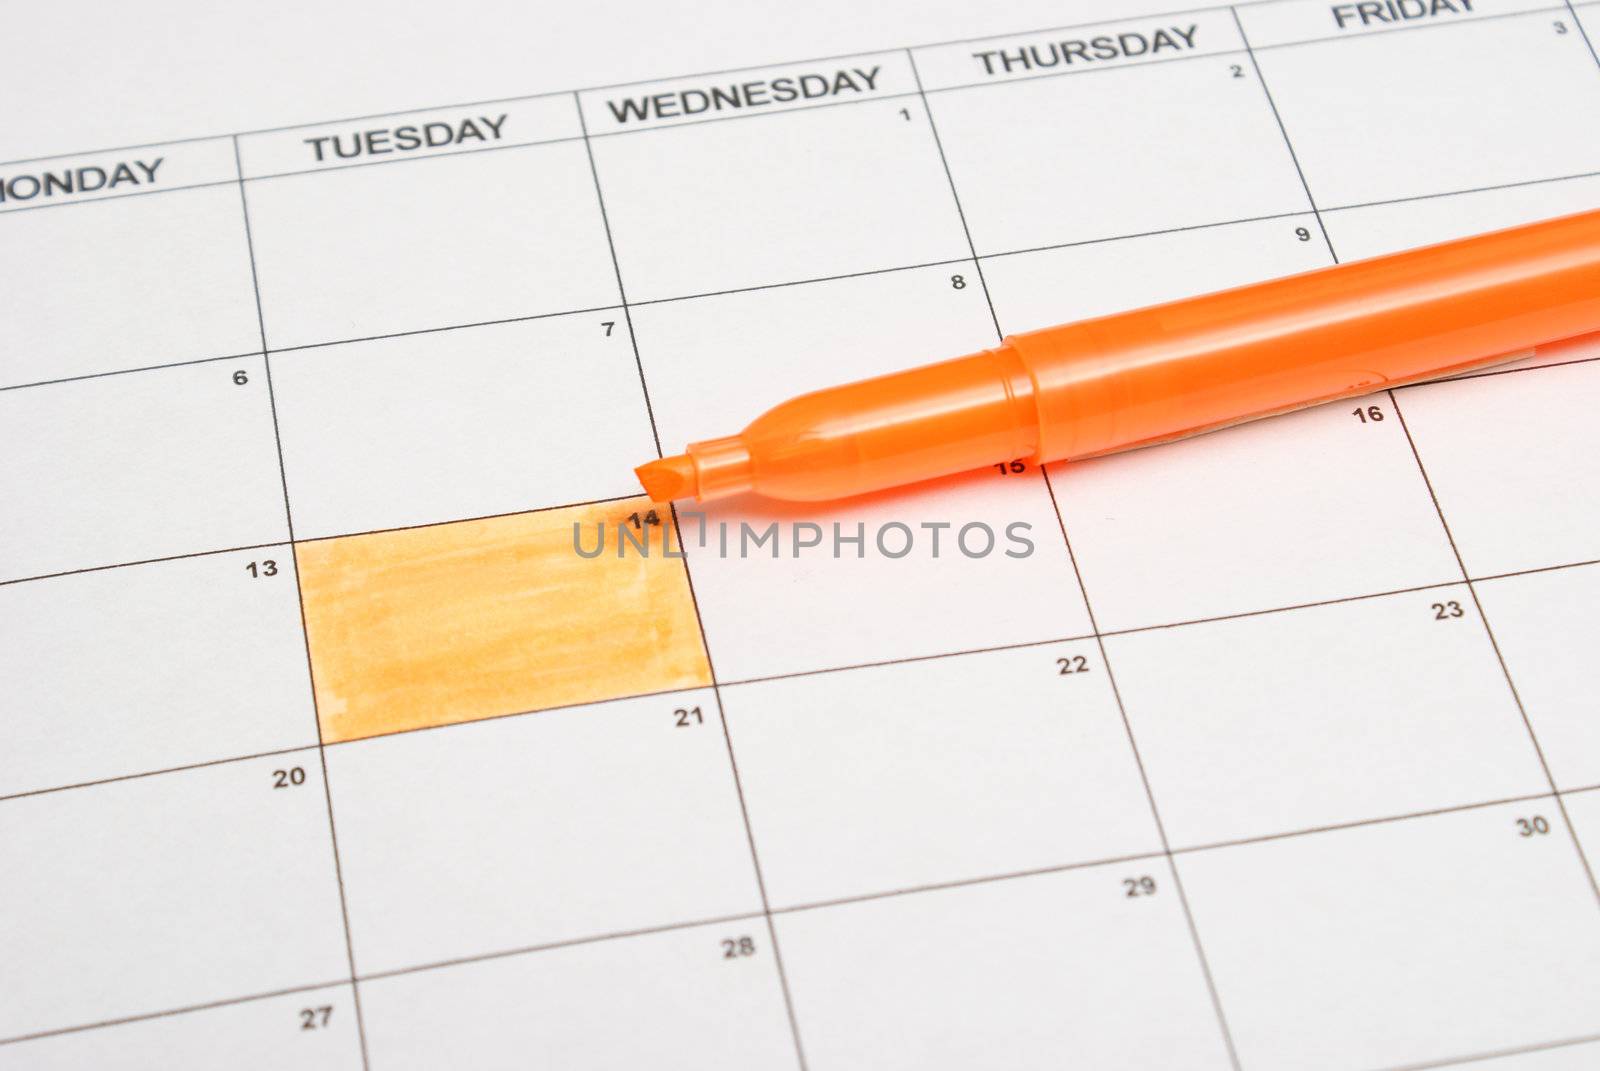 A highlighted day on a calendar month.